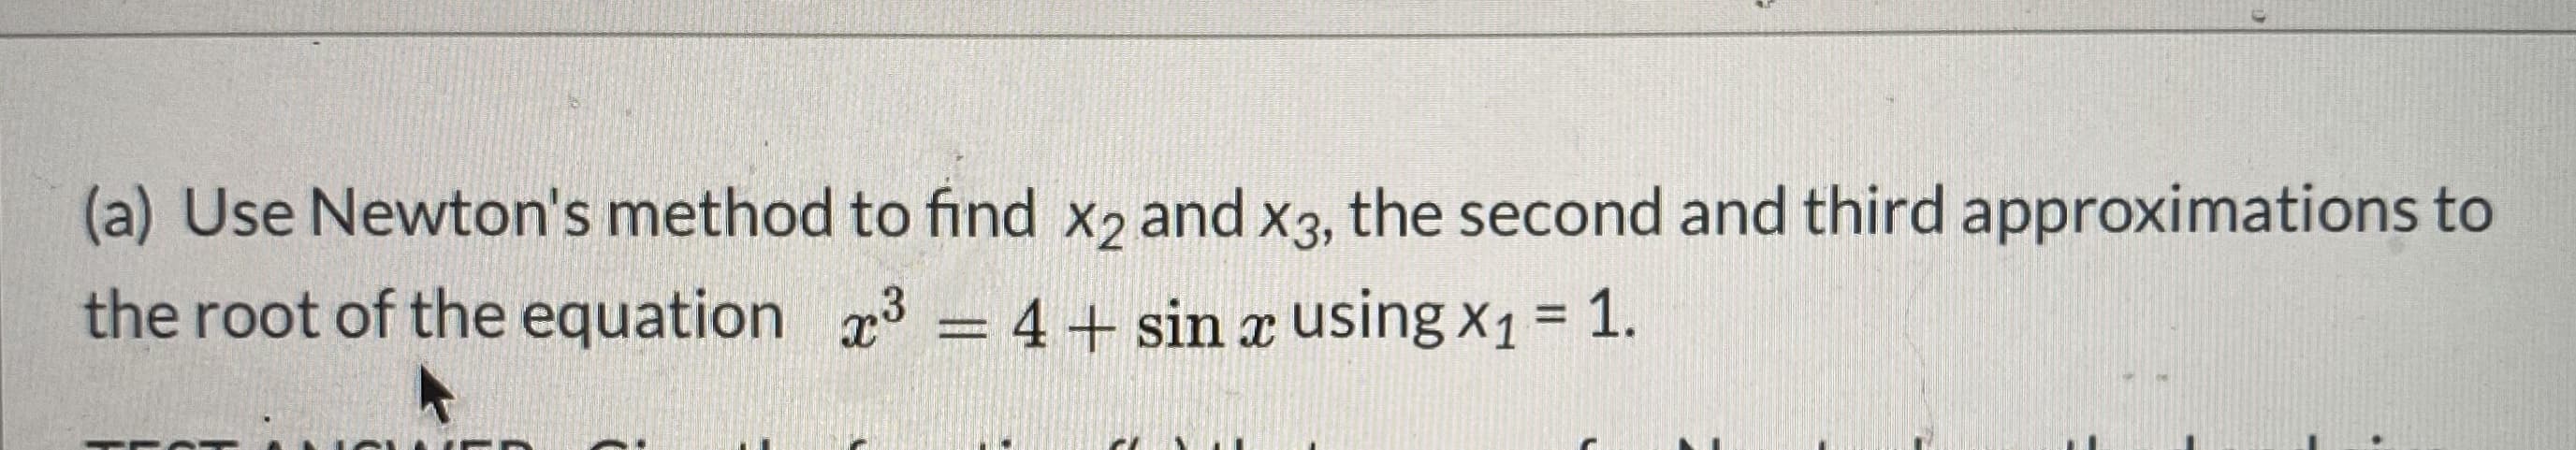 (a) Use Newton's method to find x2 and x3, the second and third approximations to
the root of the equation 3 = 4+ sin x using x1 = 1.
